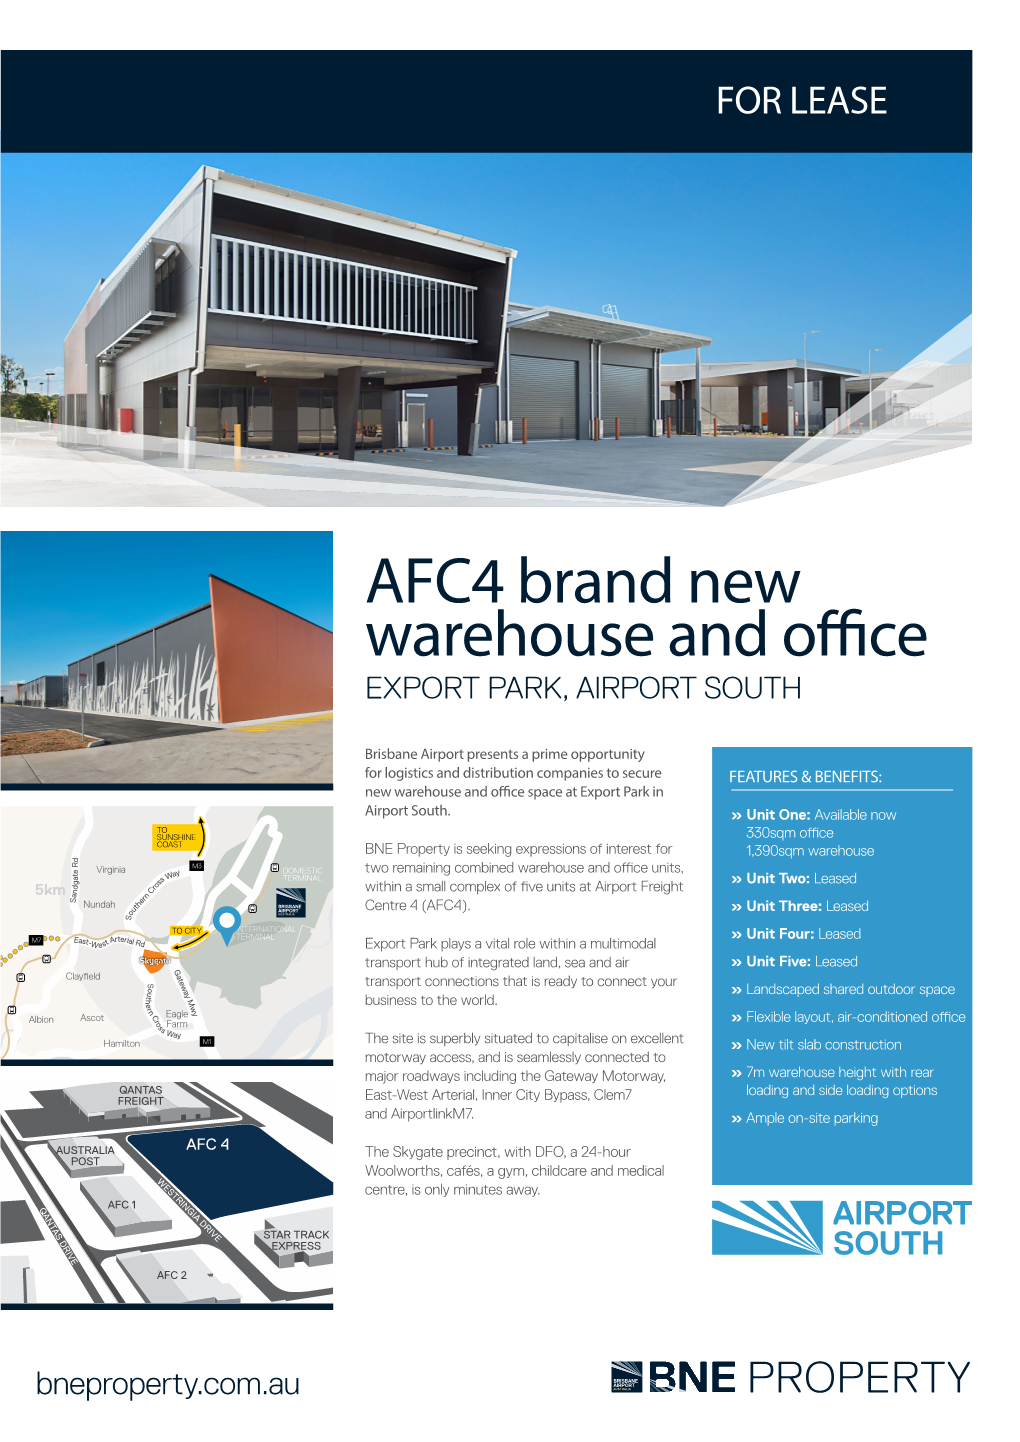 AFC4 Brand New Warehouse and Office Export Park, AIRPORT SOUTH